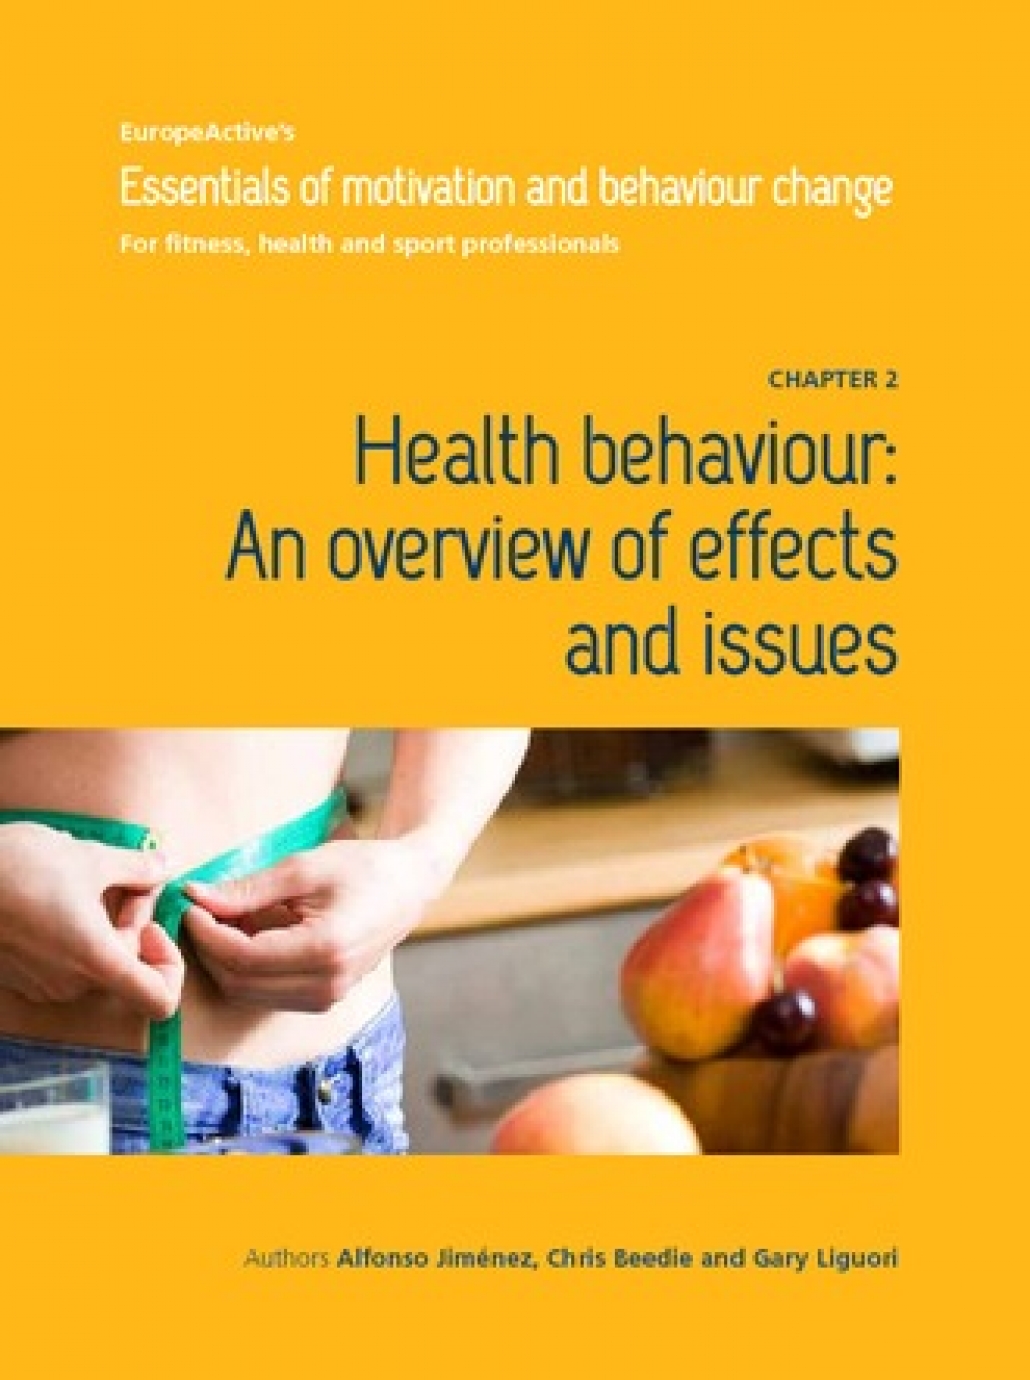 Health behaviour: An overview of effects and issues